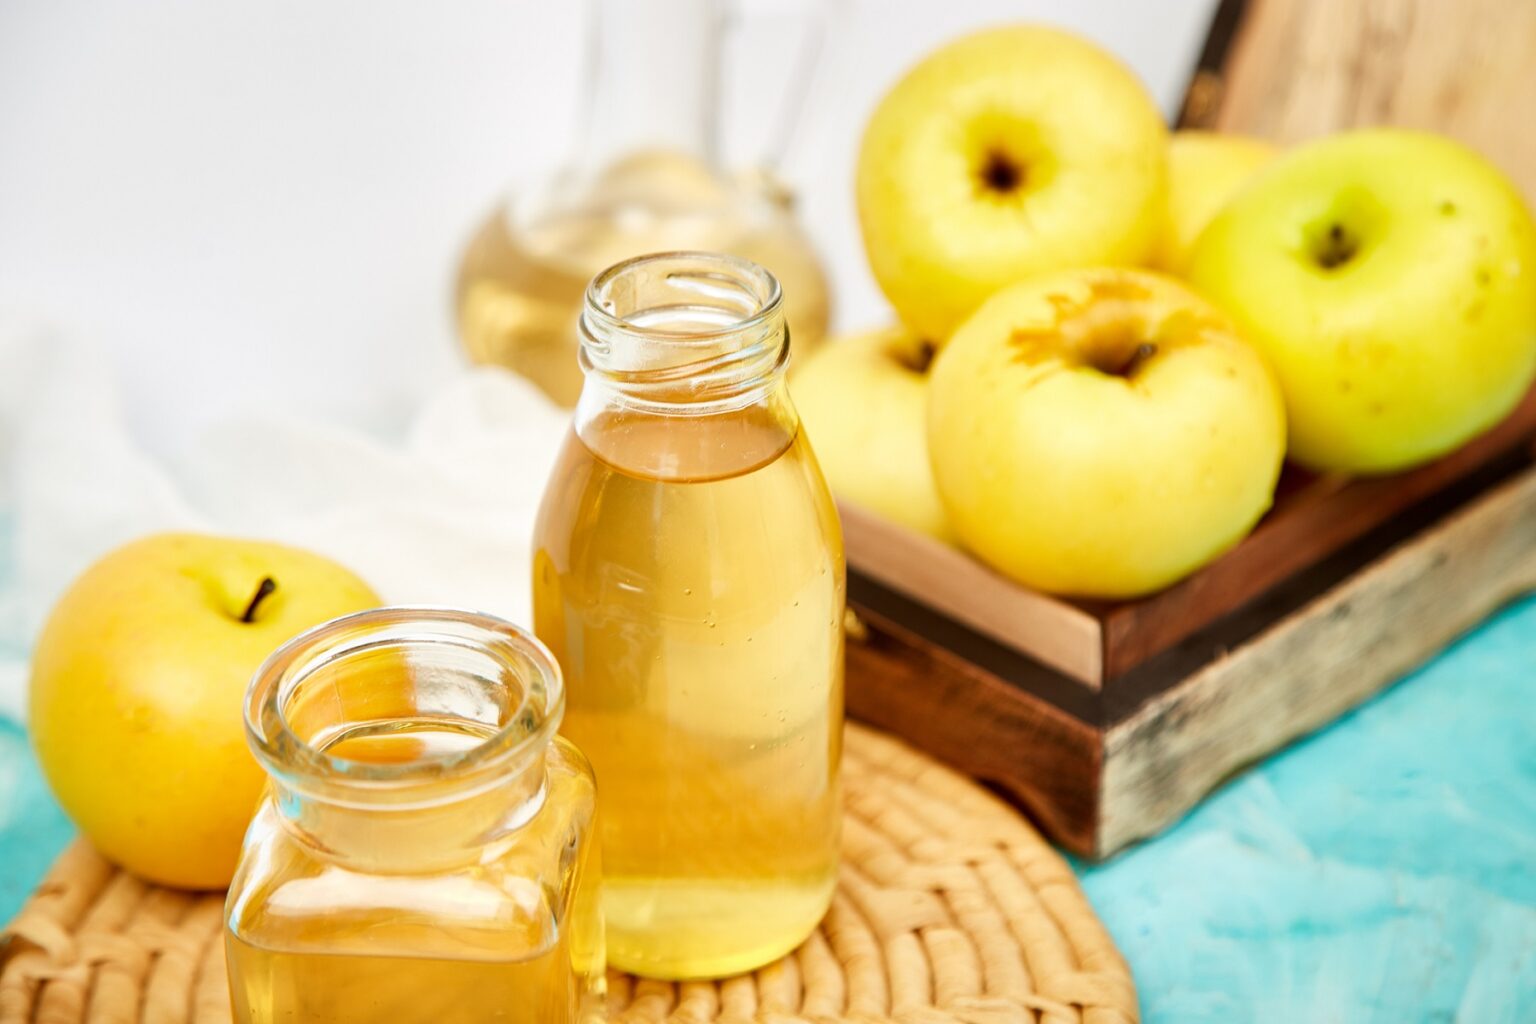 Apple cider vinegar: Is drinking this popular home remedy bad for your teeth? A dentist explains